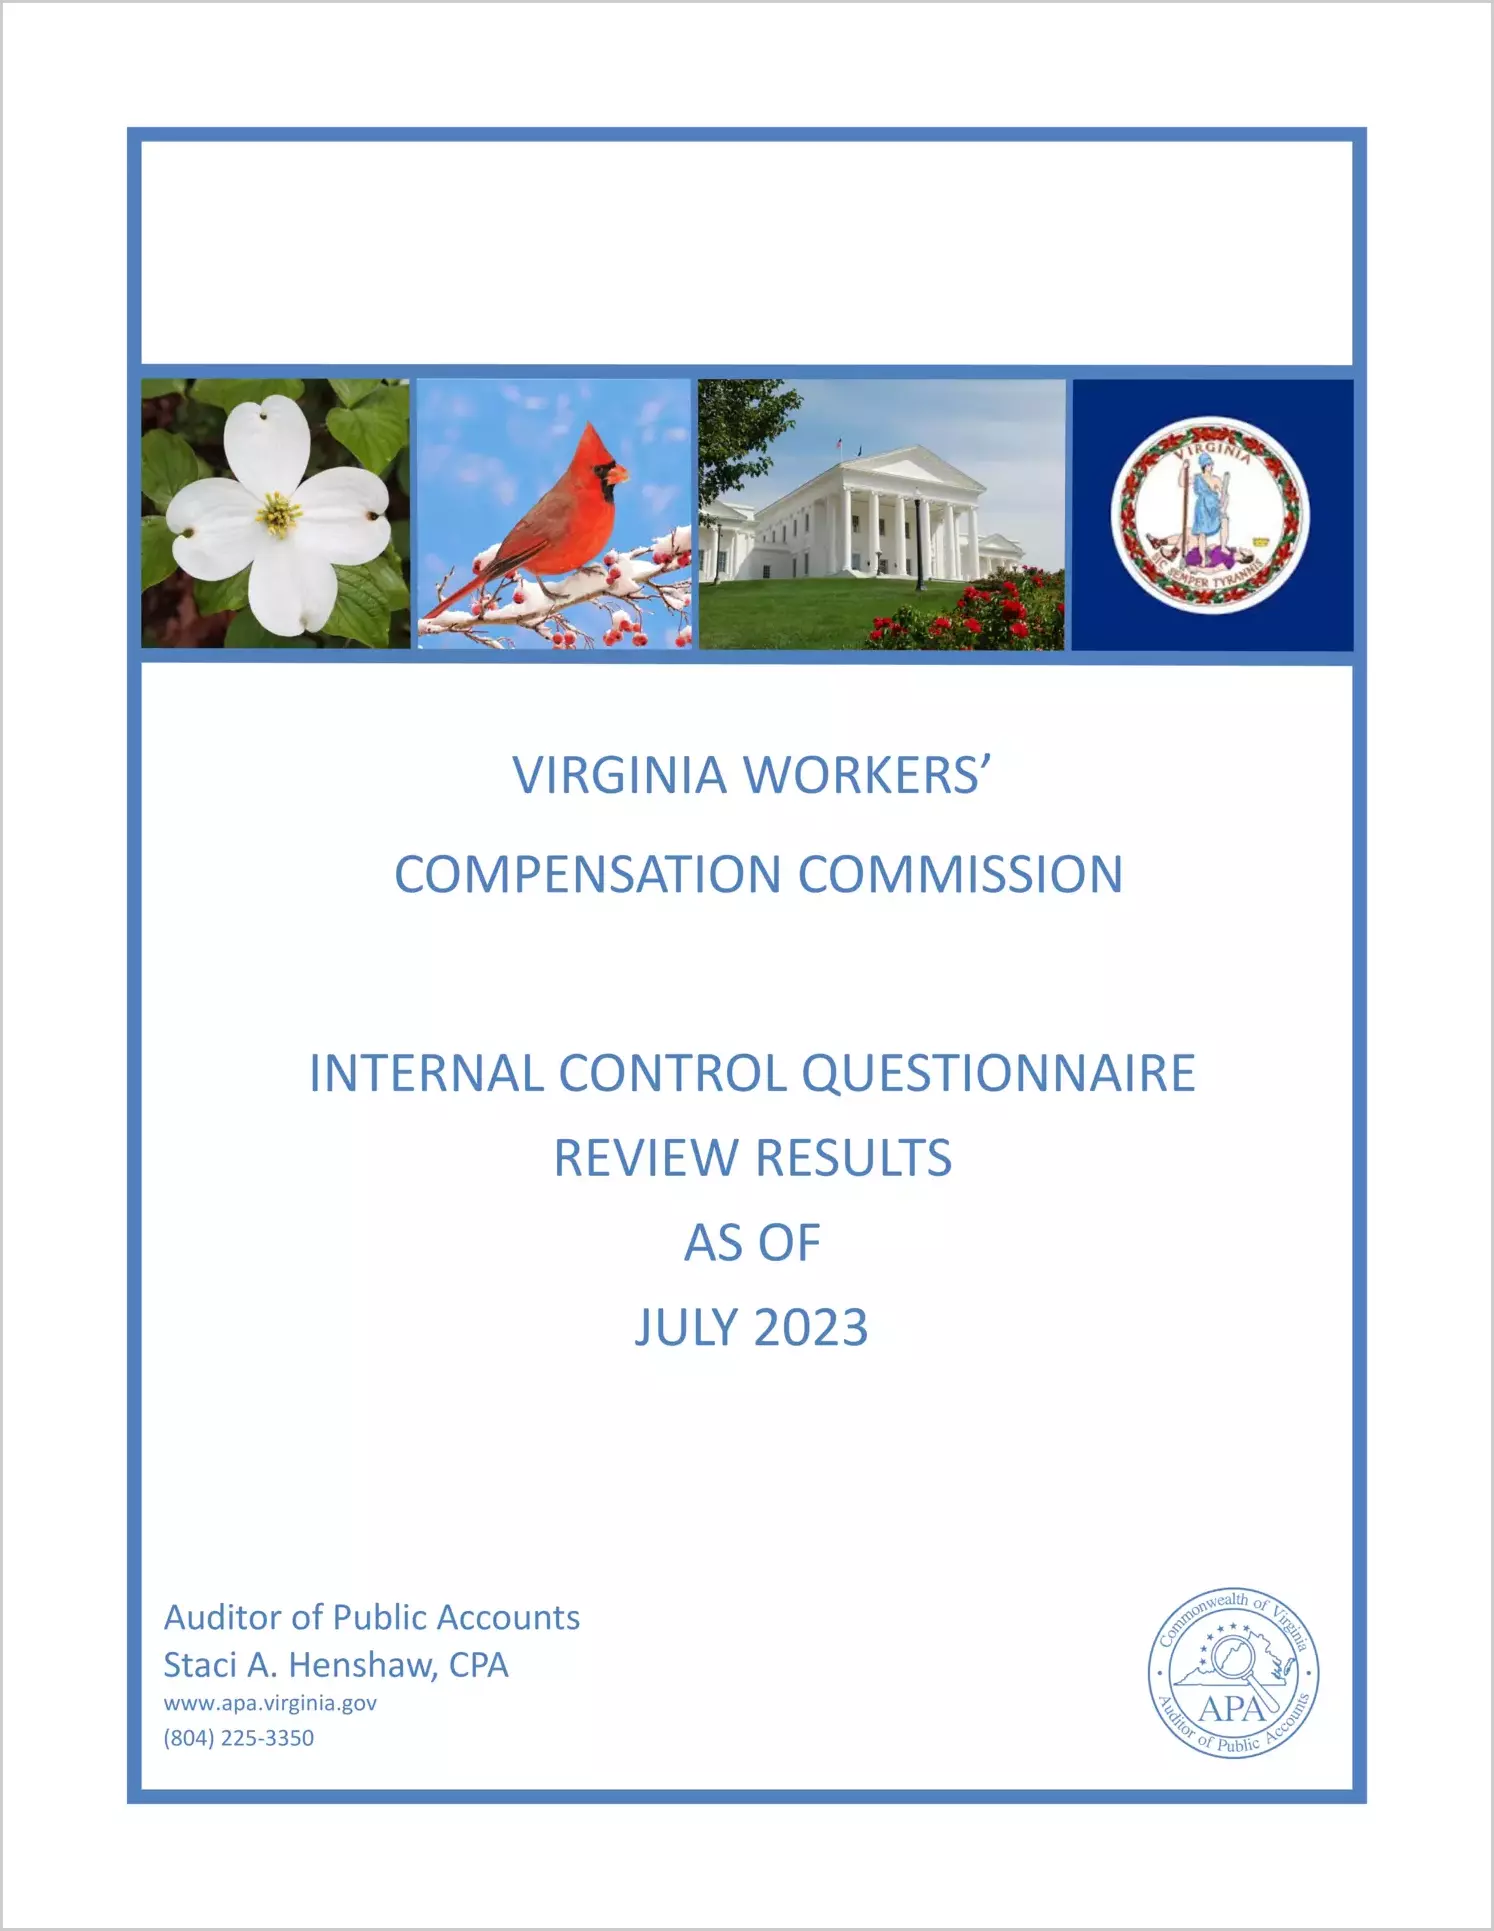 Virginia Workers' Compensation Commission Internal Control Questionnaire Review Results as of July 2023